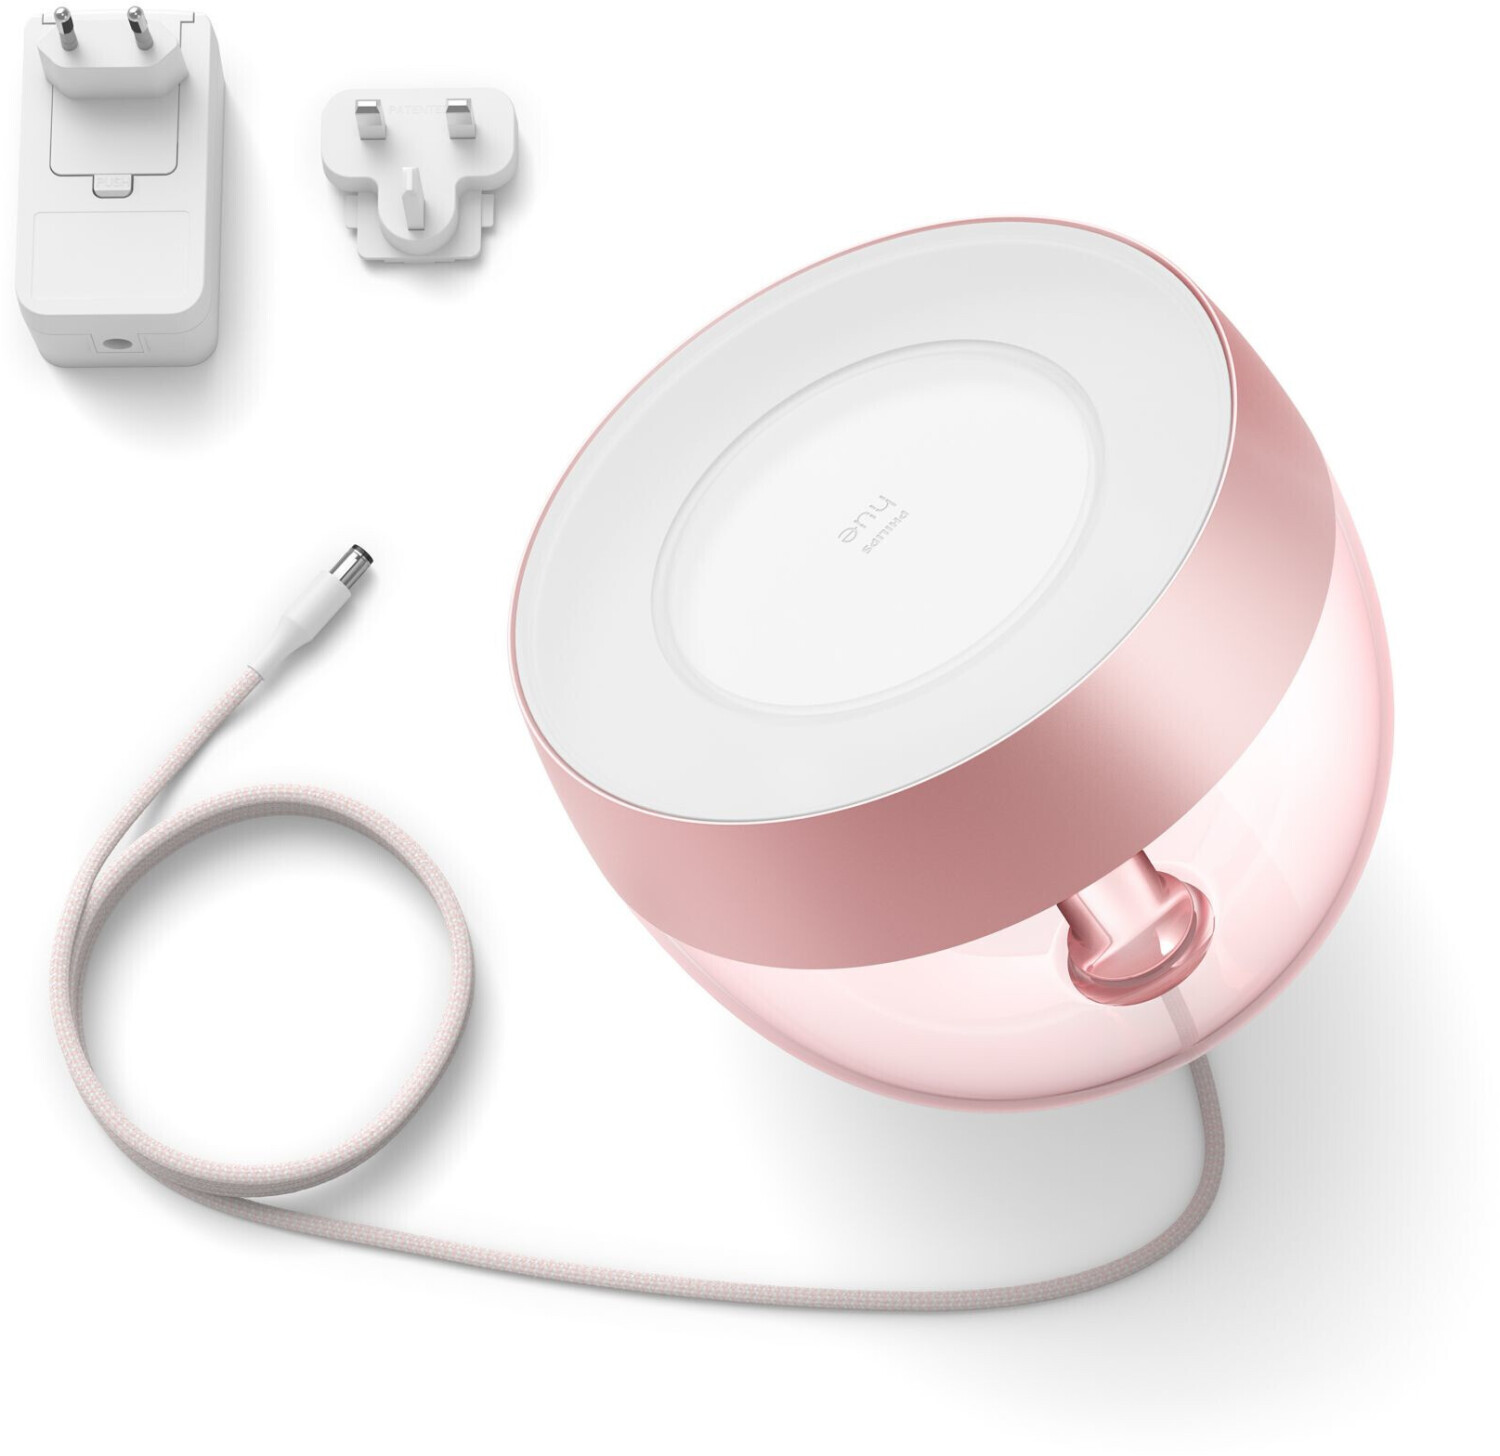 Ambiance Hue LED rosé Iris White Edition 107,11 Preisvergleich ab bei Philips Bluetooth € Limited Color | and